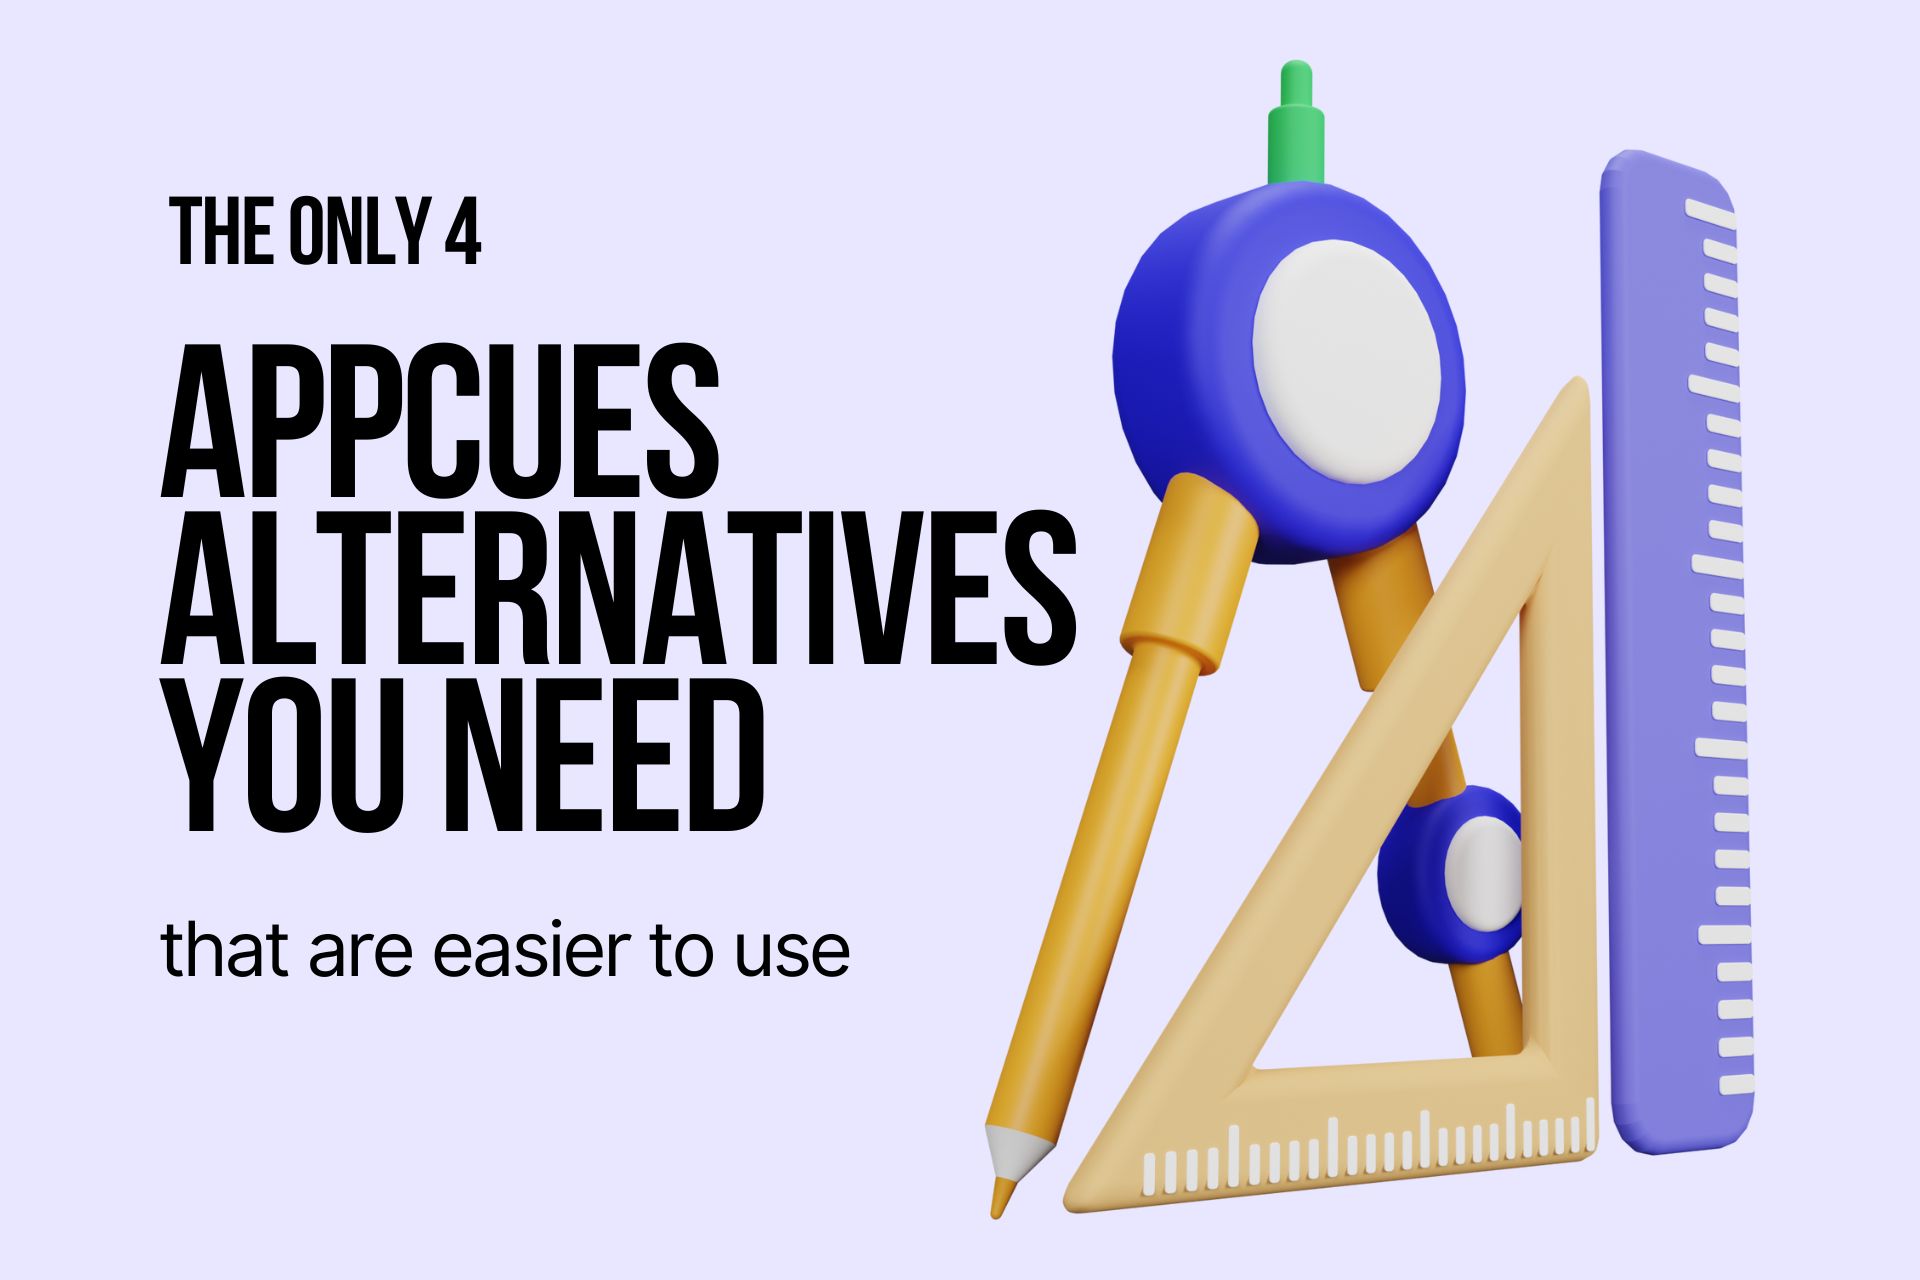 The Only 4 Appcues Alternatives You Need That are Easier to Use